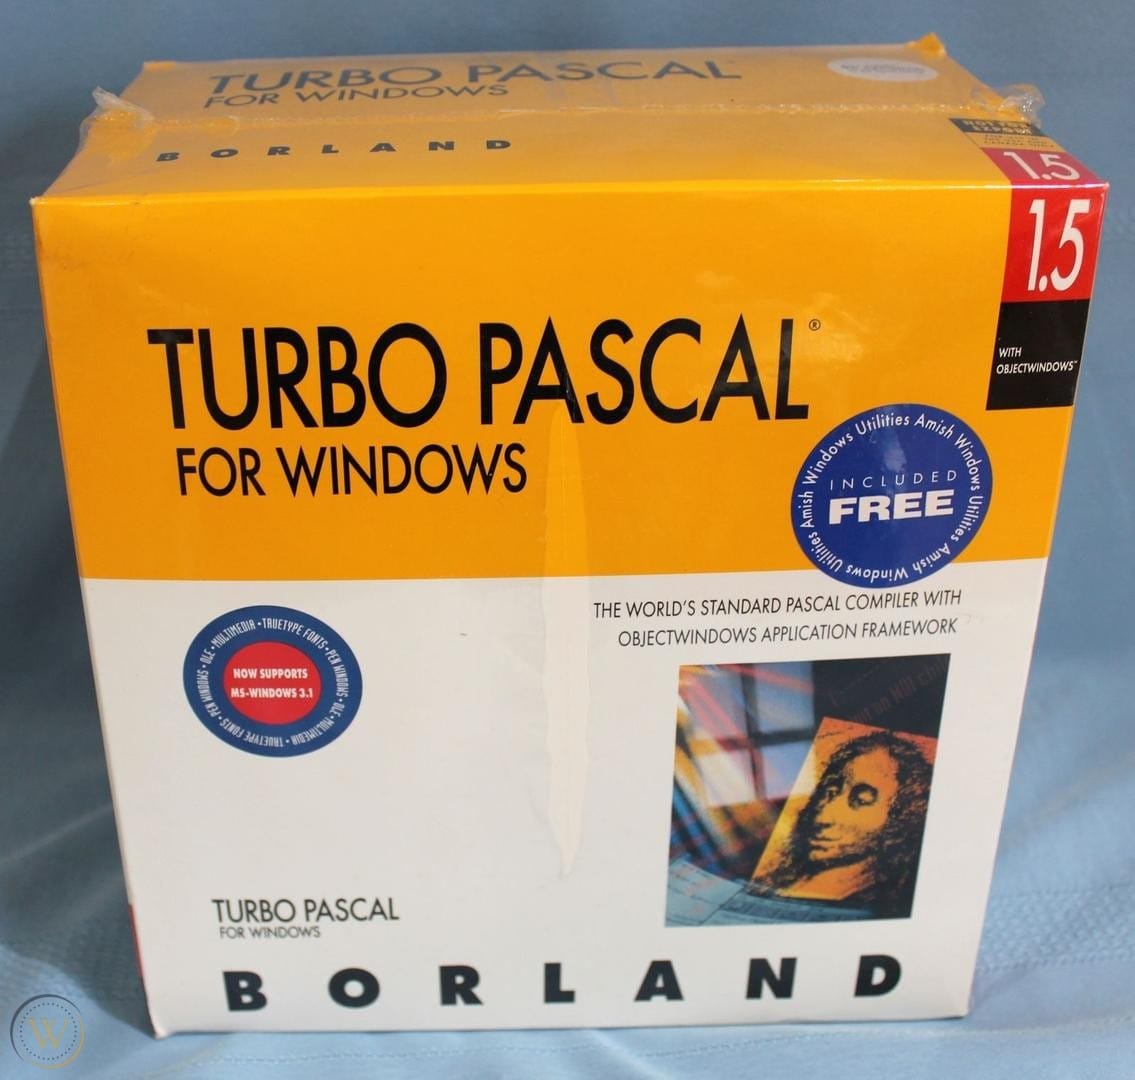 Turbo Pascal, software delivered in a box